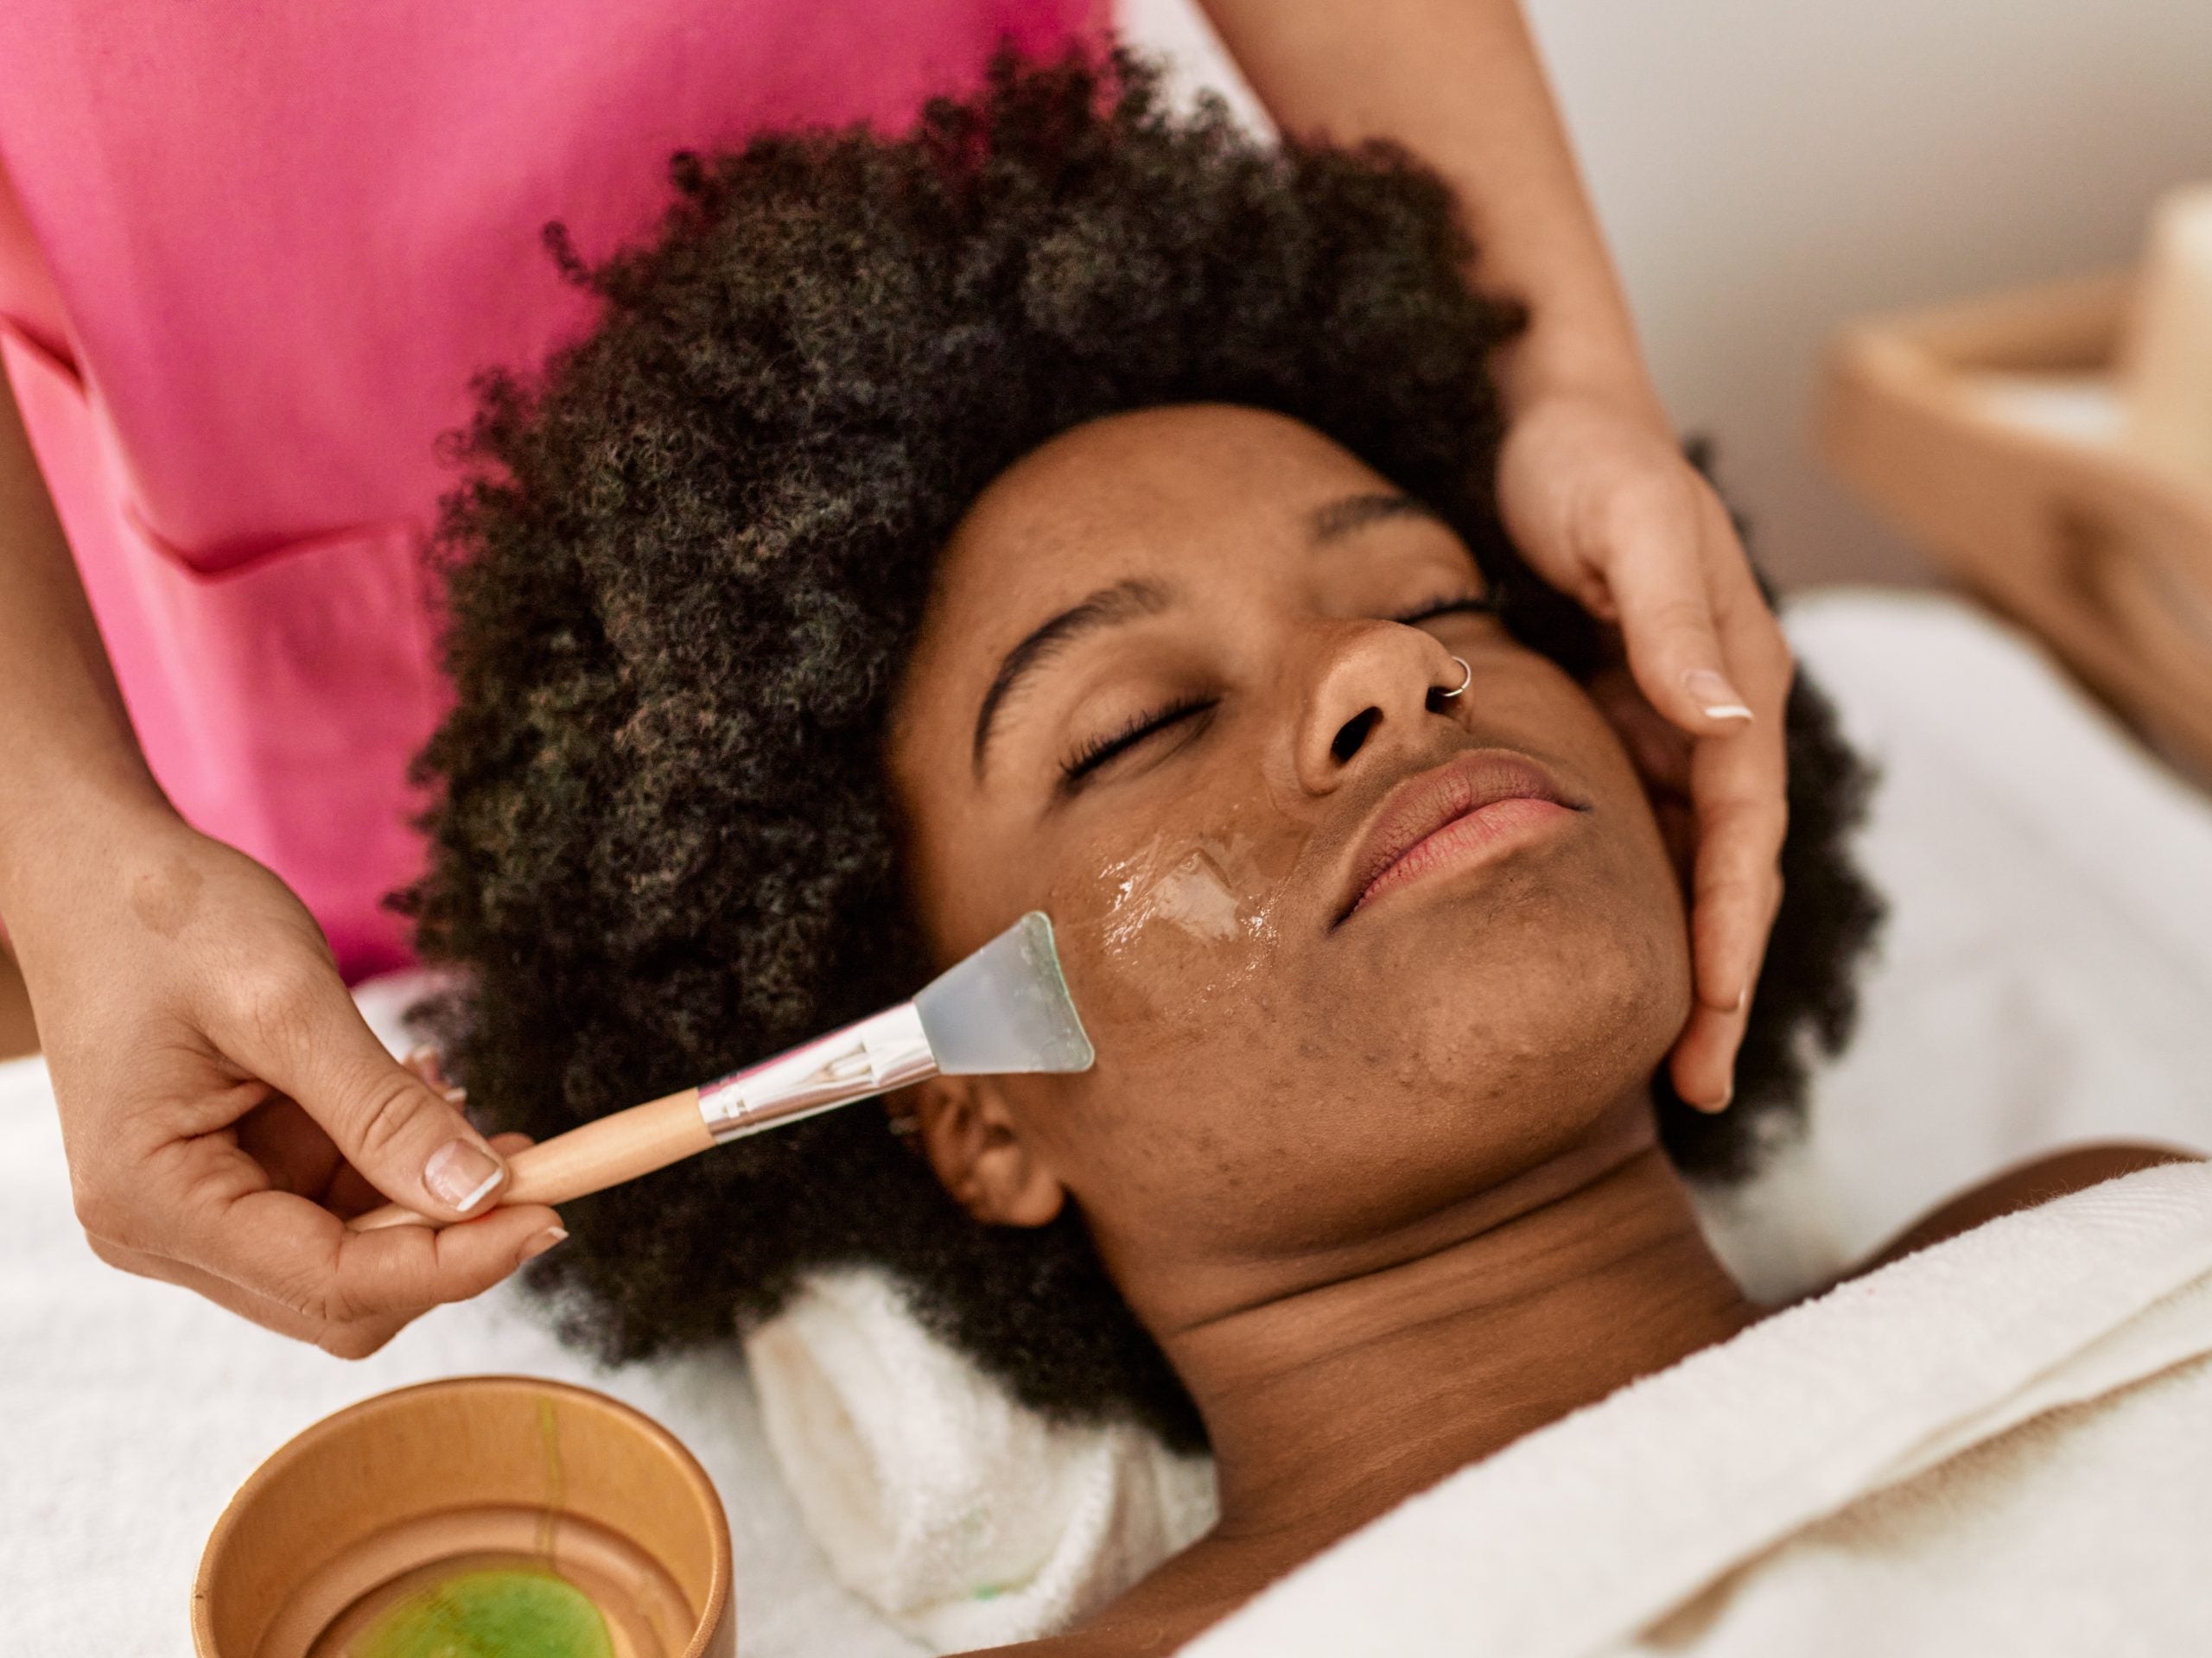 I Tried The Volcano Facial– Here's How It Went